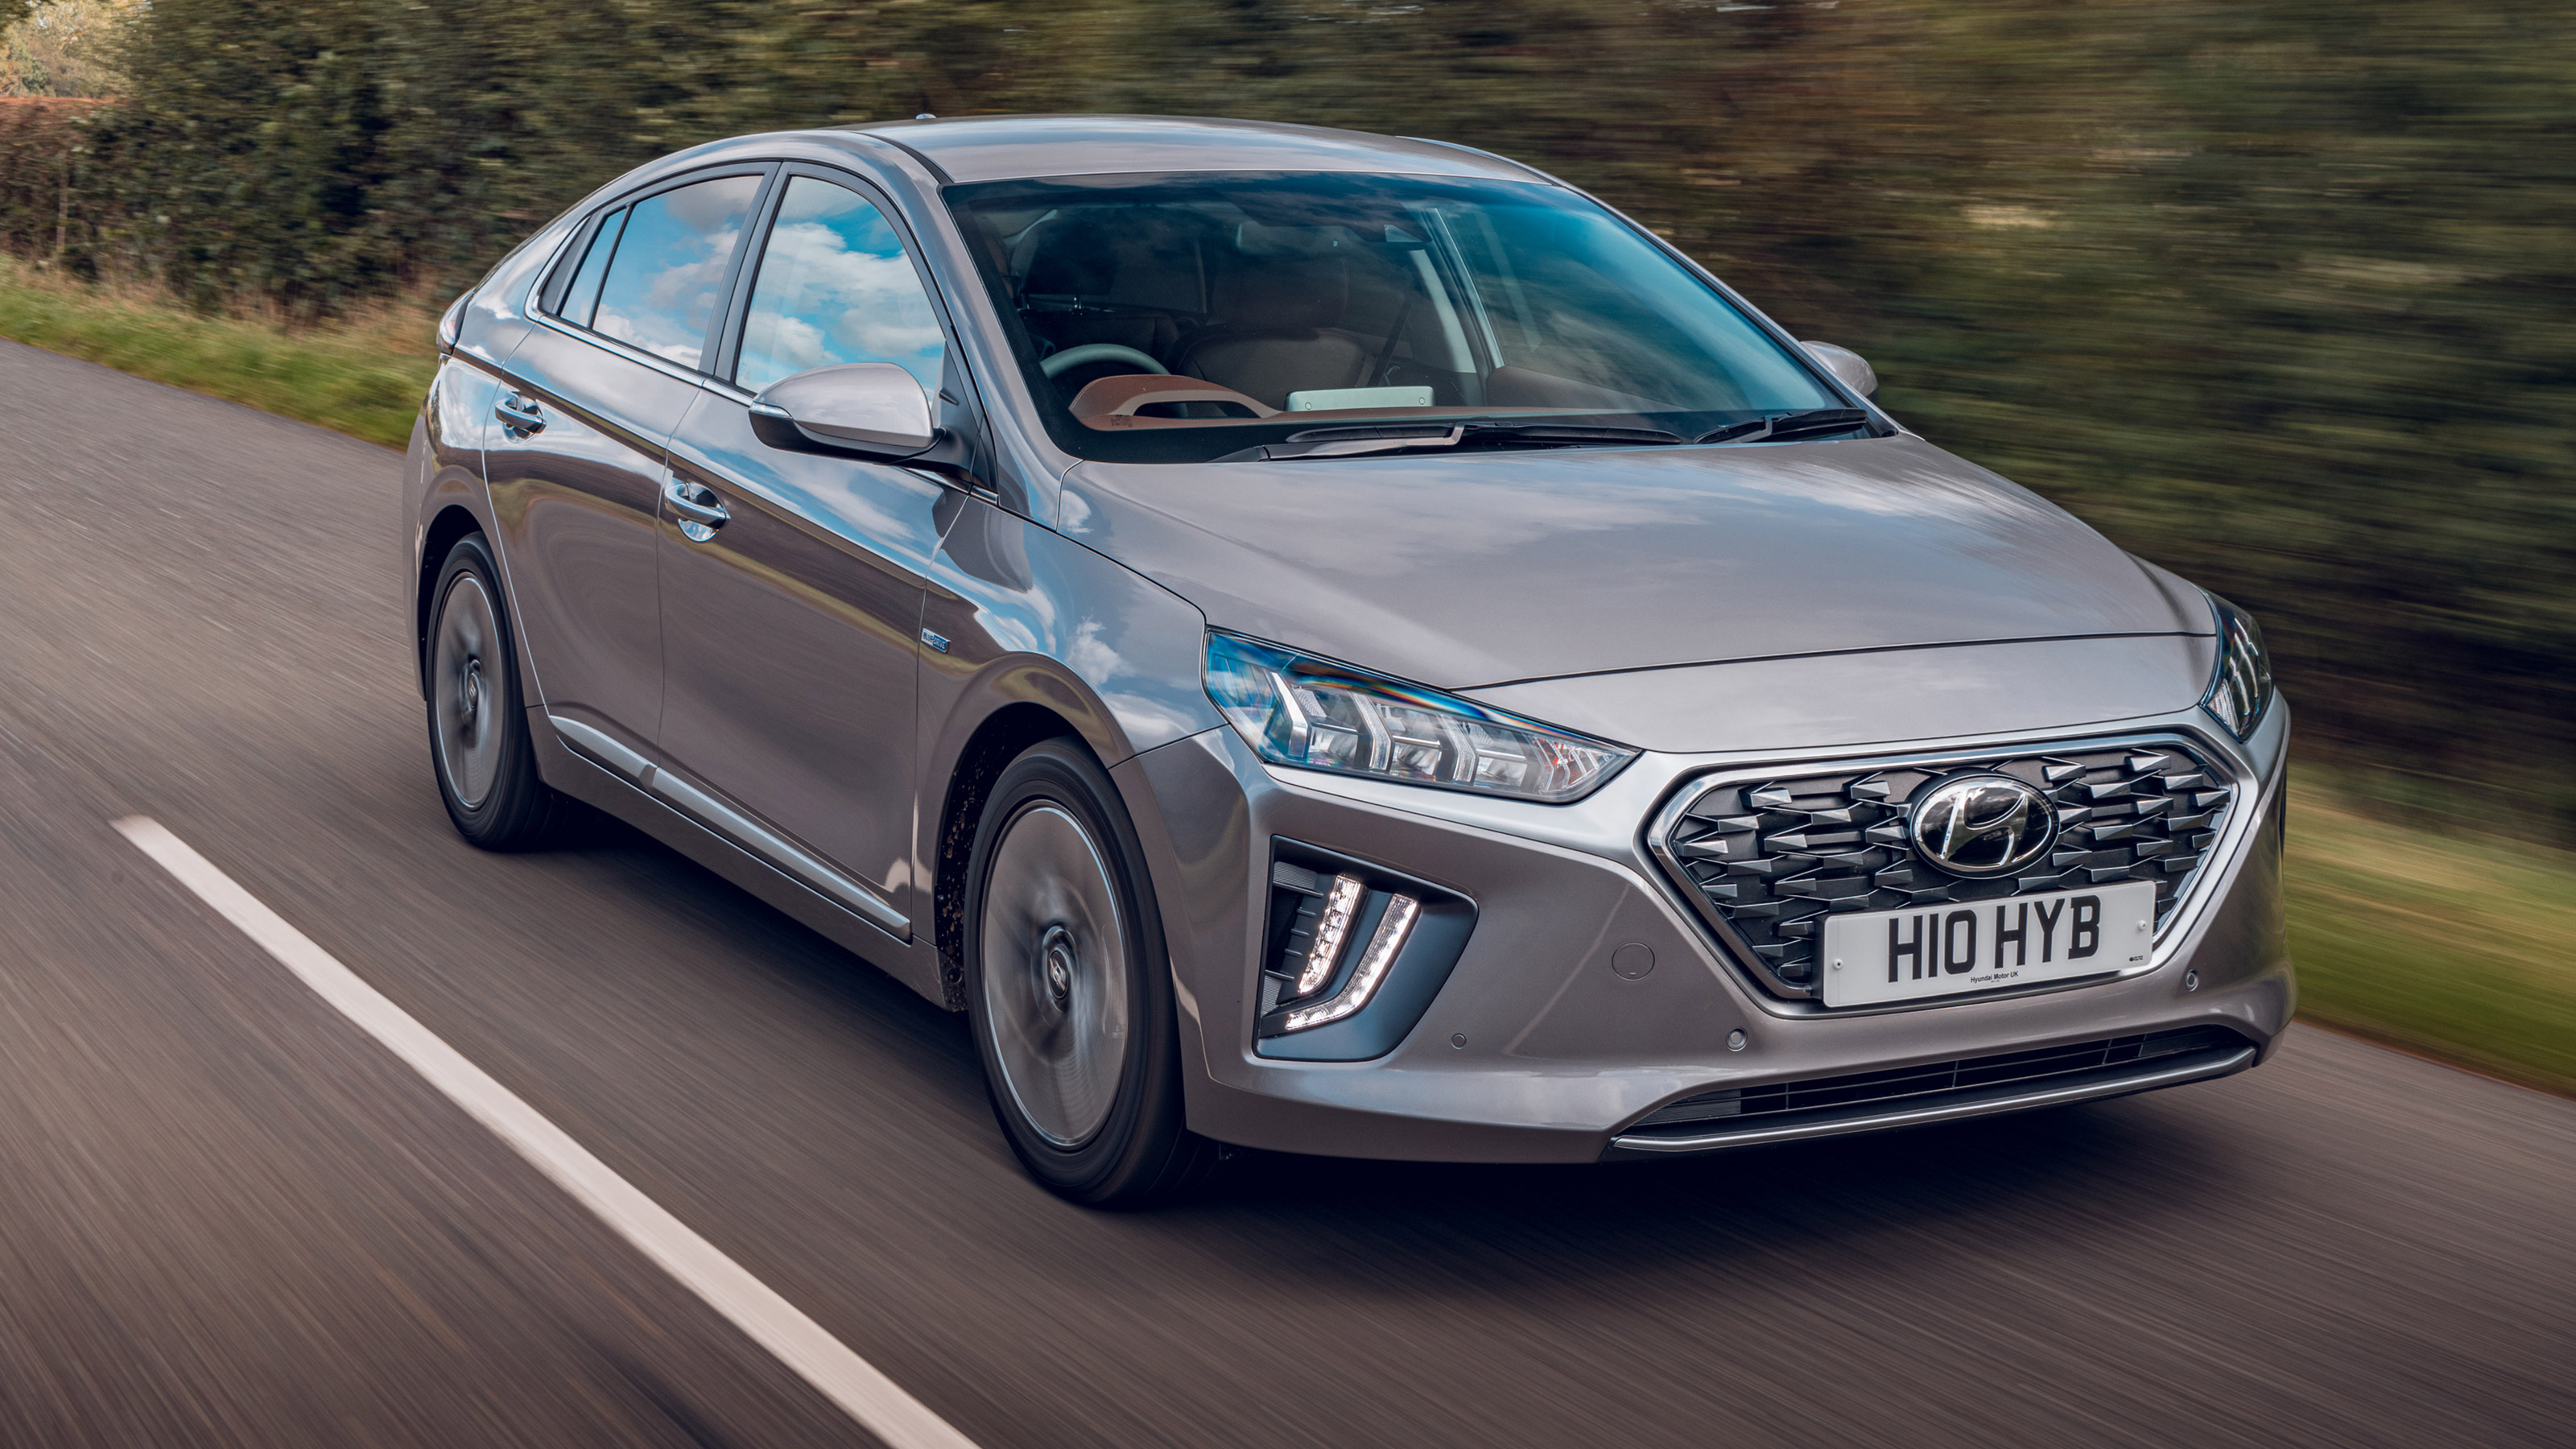 Hyundai Ioniq Hybrid review pictures Carbuyer